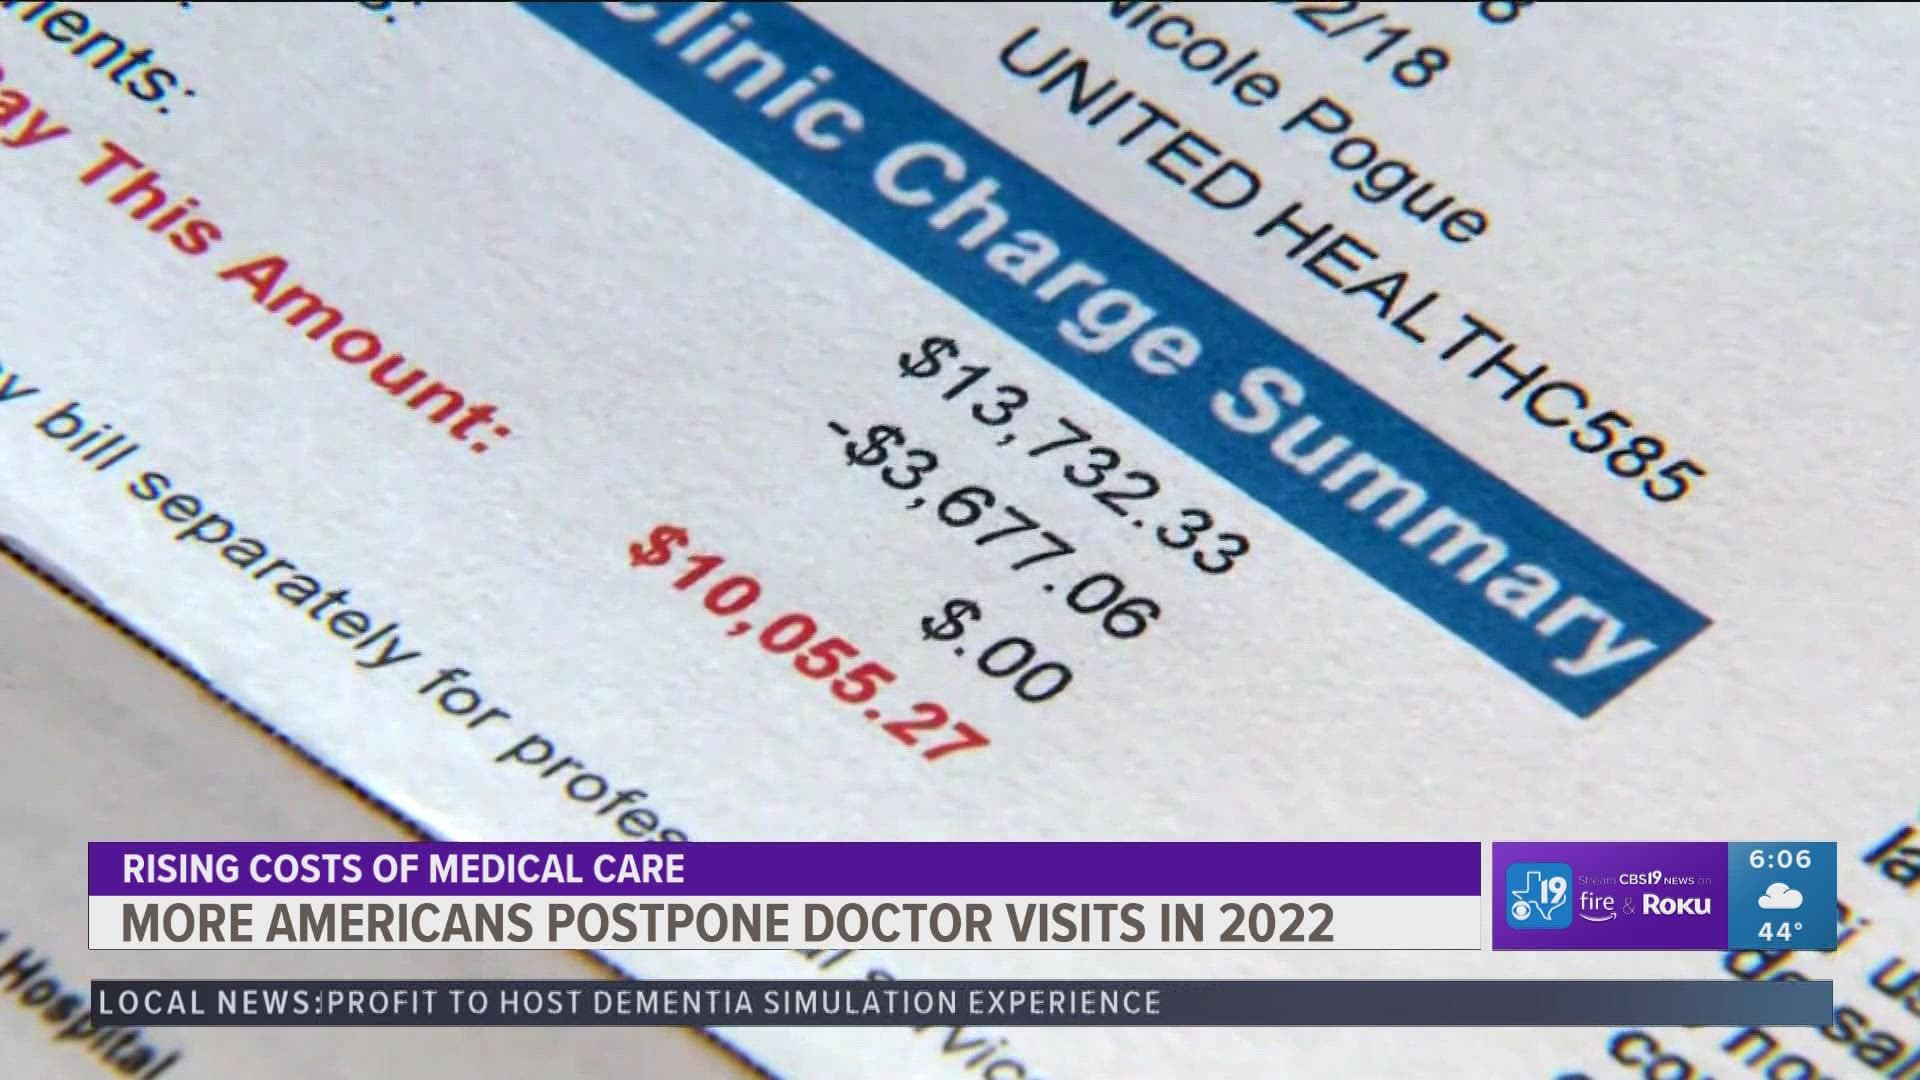 A new rule took effect two years ago, allowing patients to see the prices up front, but some hospitals still aren’t complying.